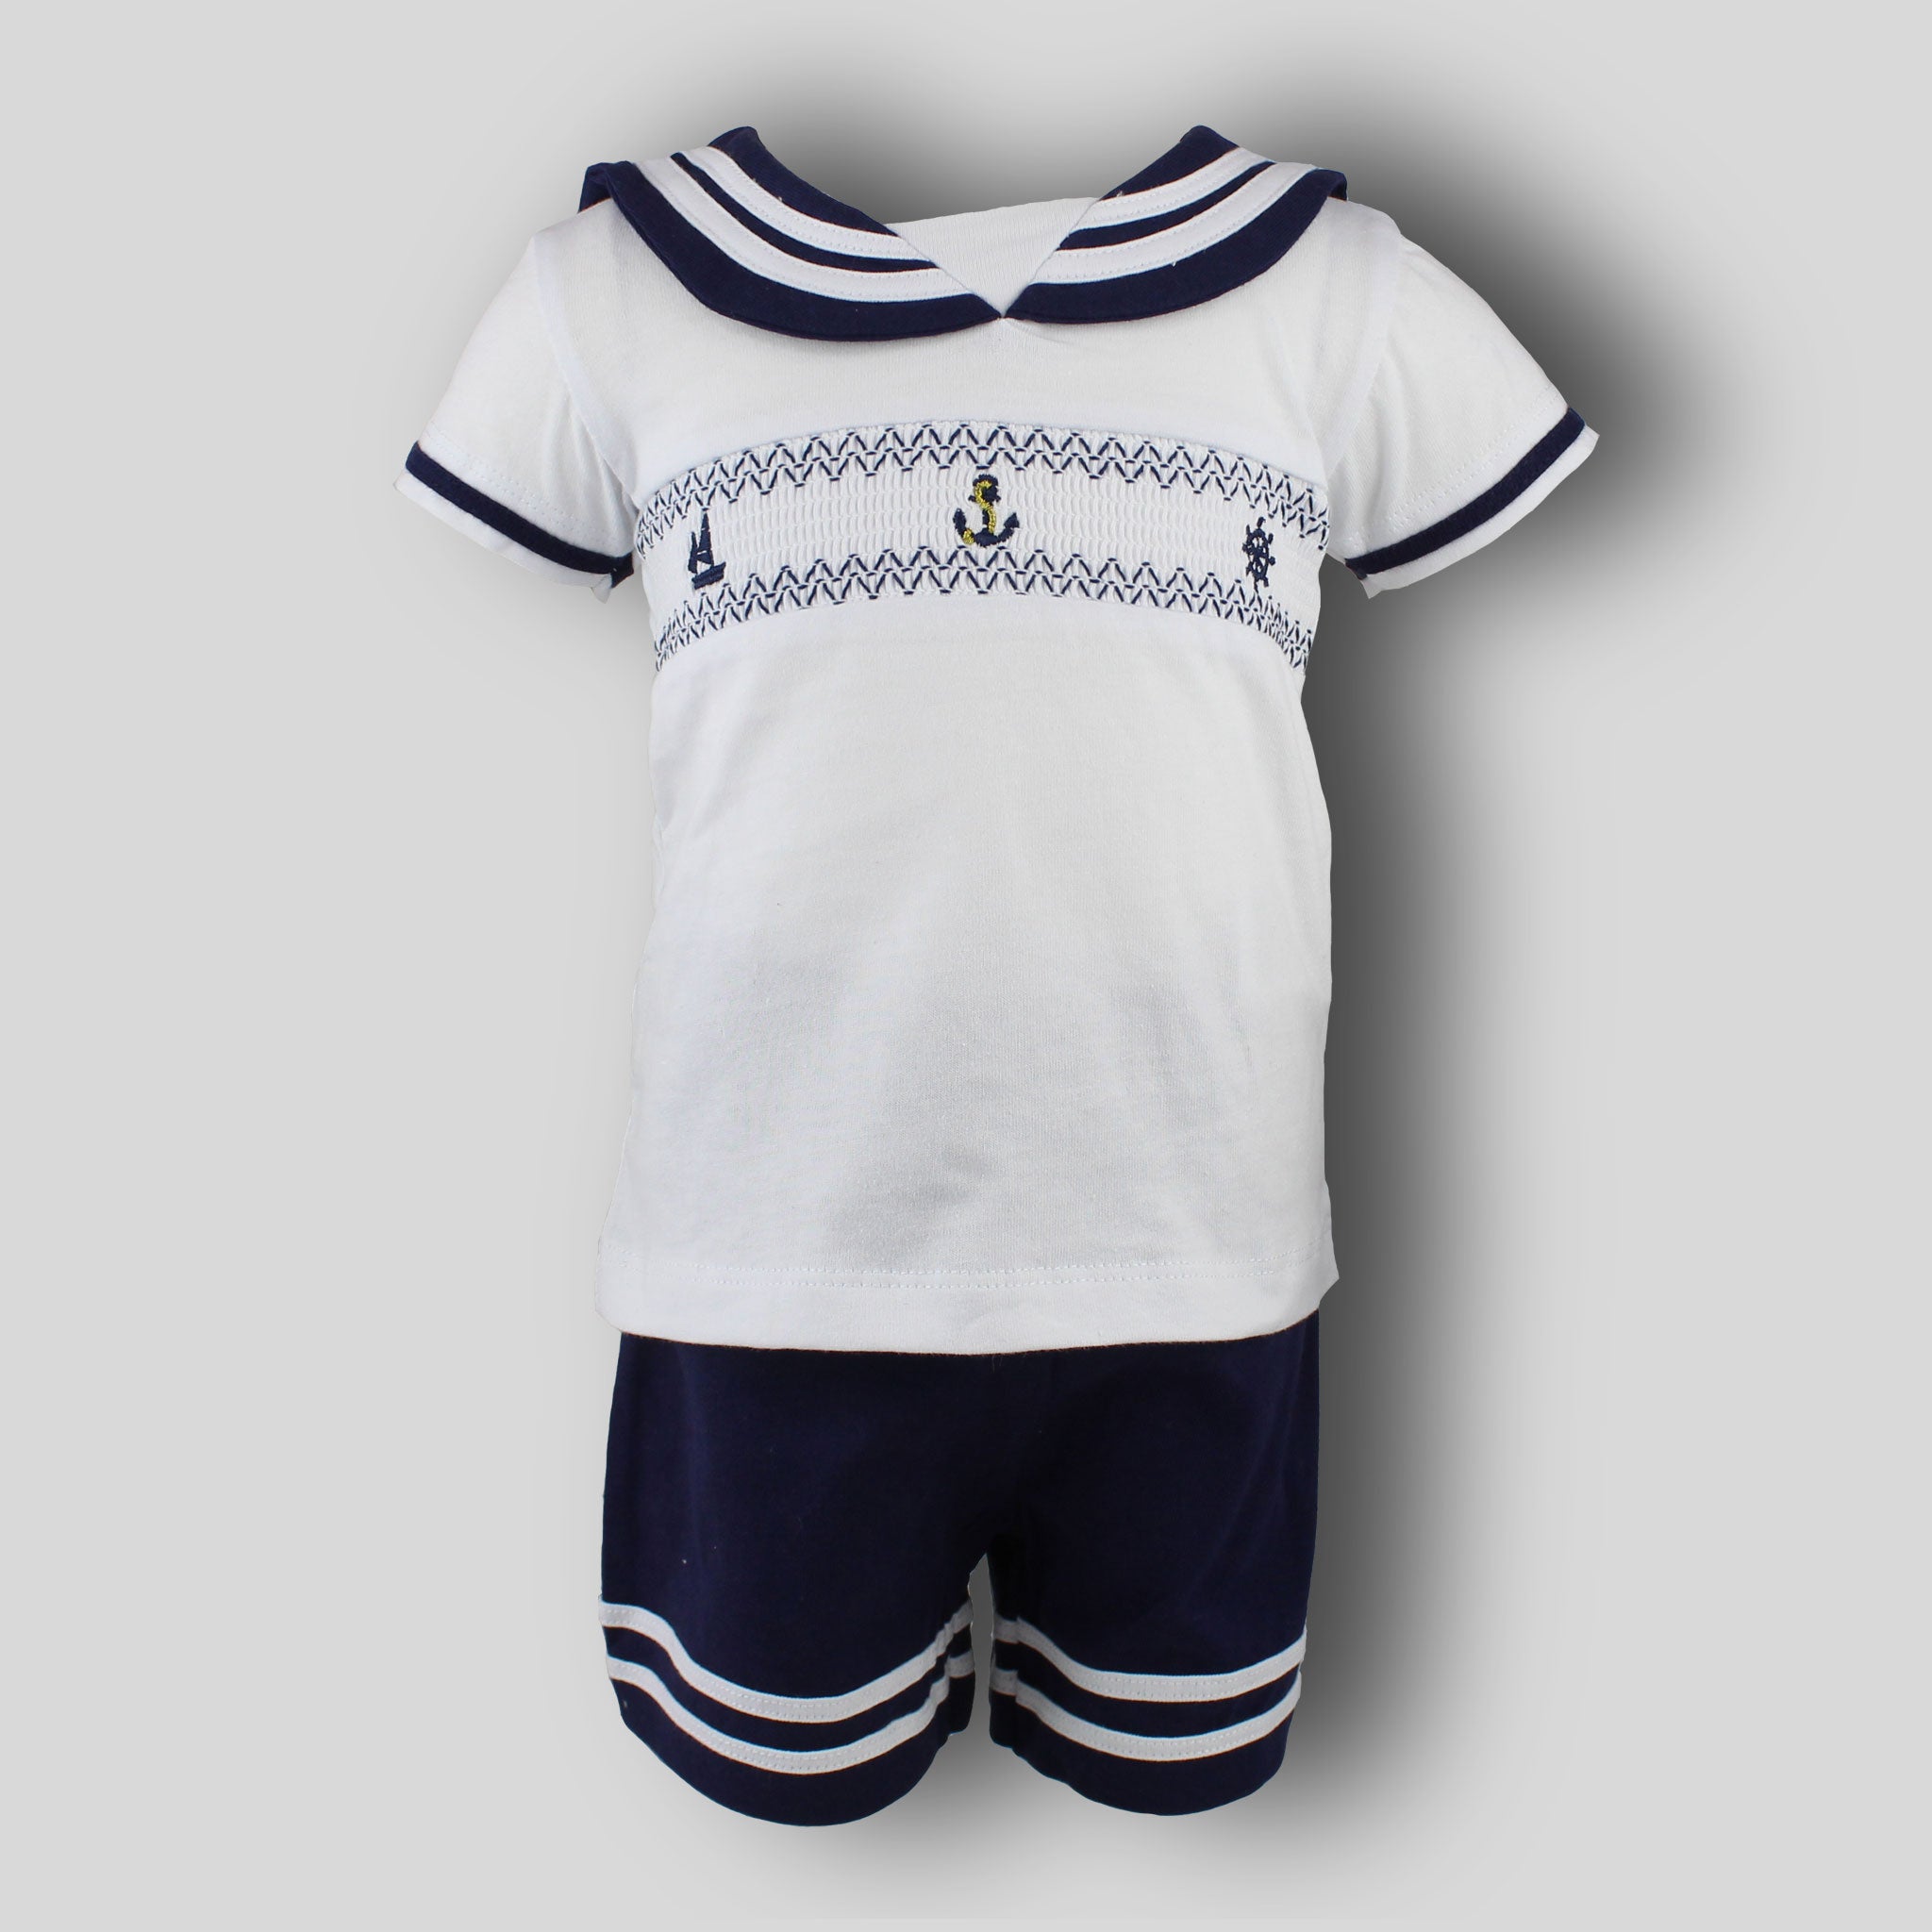 baby boys summer outfit sailor